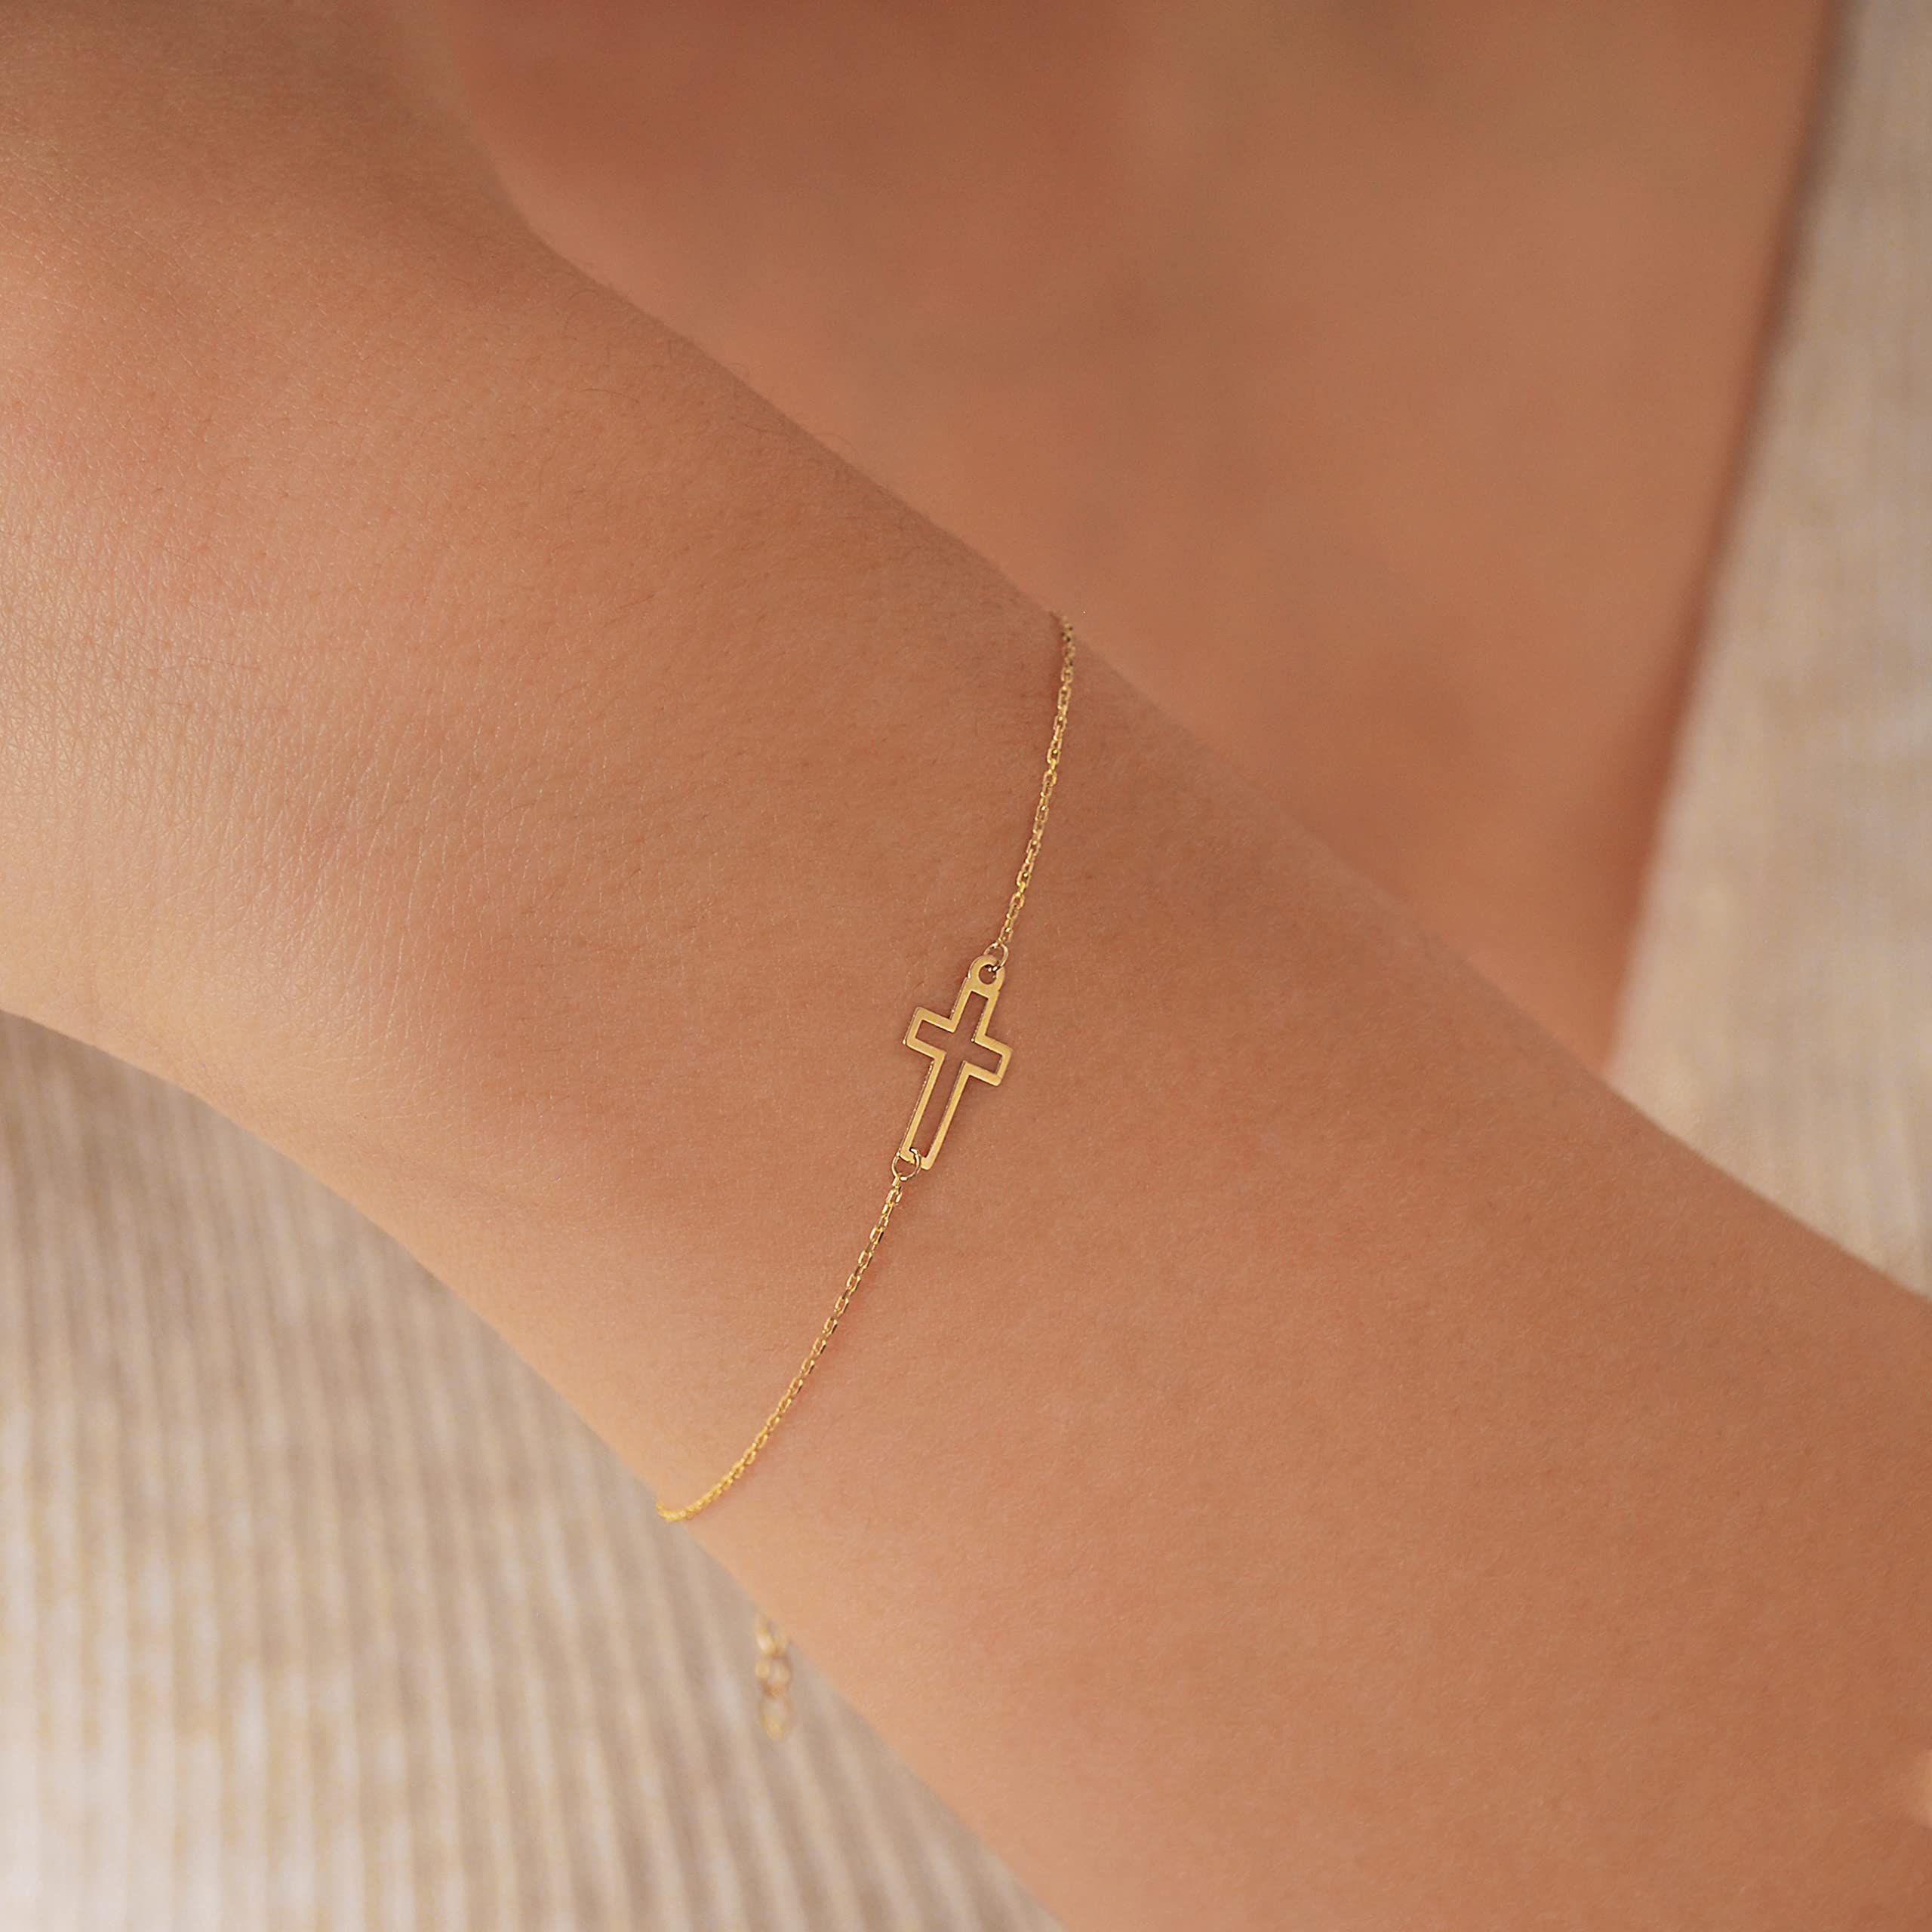 MIONZA Jewelry 14k Solid Gold Cross Bracelet for Women, Teen Girls, Baby | Real Gold Sideways Adjustable Cross Bracelet | Gold Plated Bracelet for Women | Christian Baptism Gift